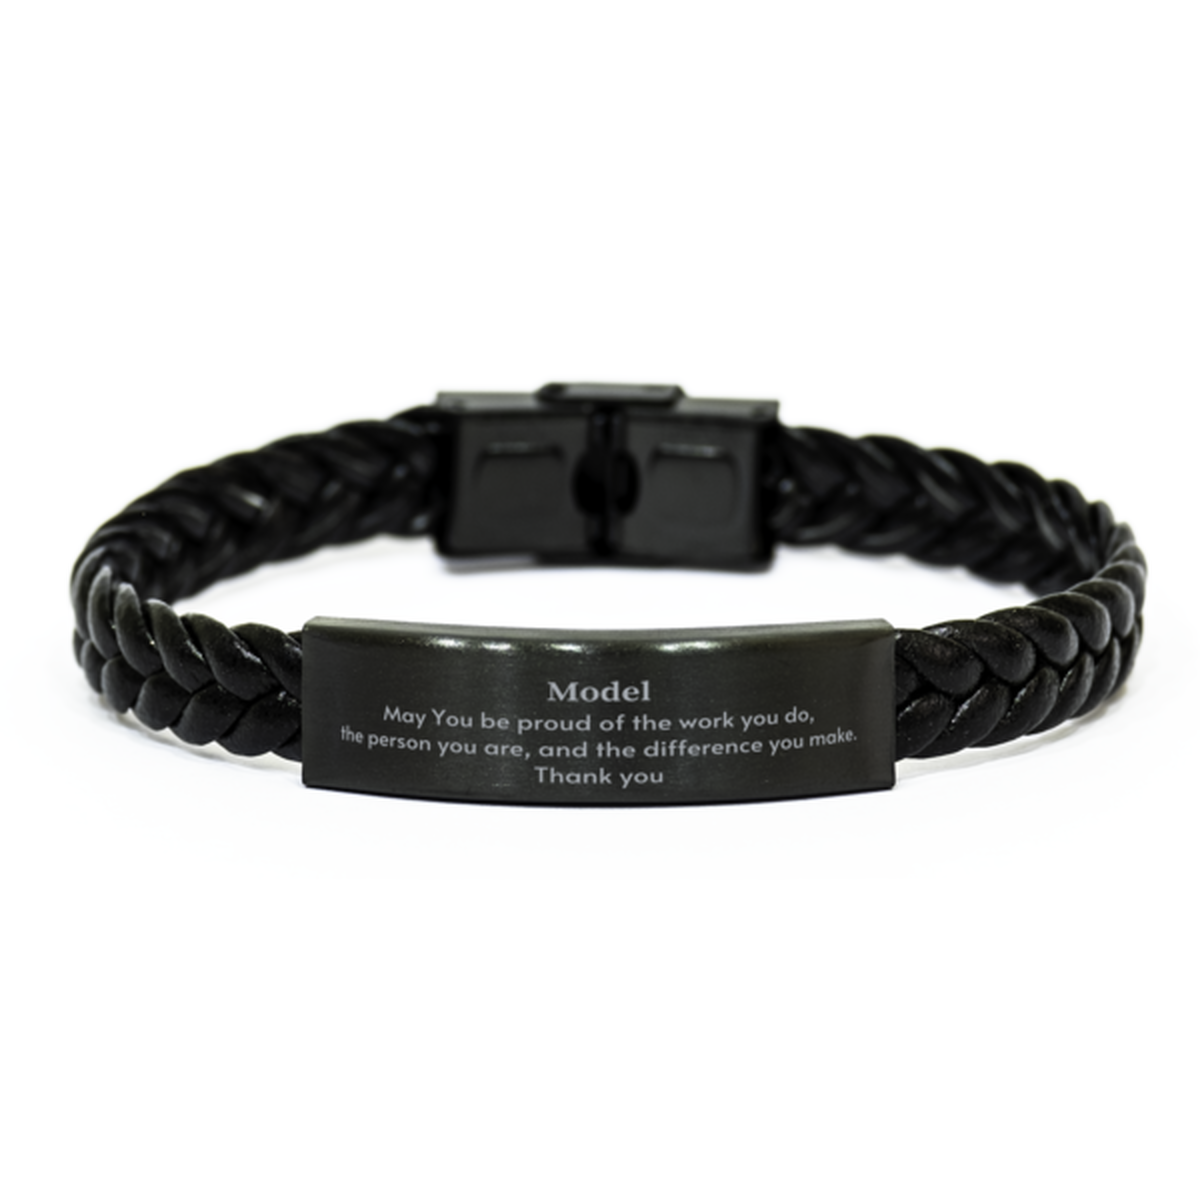 Heartwarming Braided Leather Bracelet Retirement Coworkers Gifts for Model, Model May You be proud of the work you do, the person you are Gifts for Boss Men Women Friends